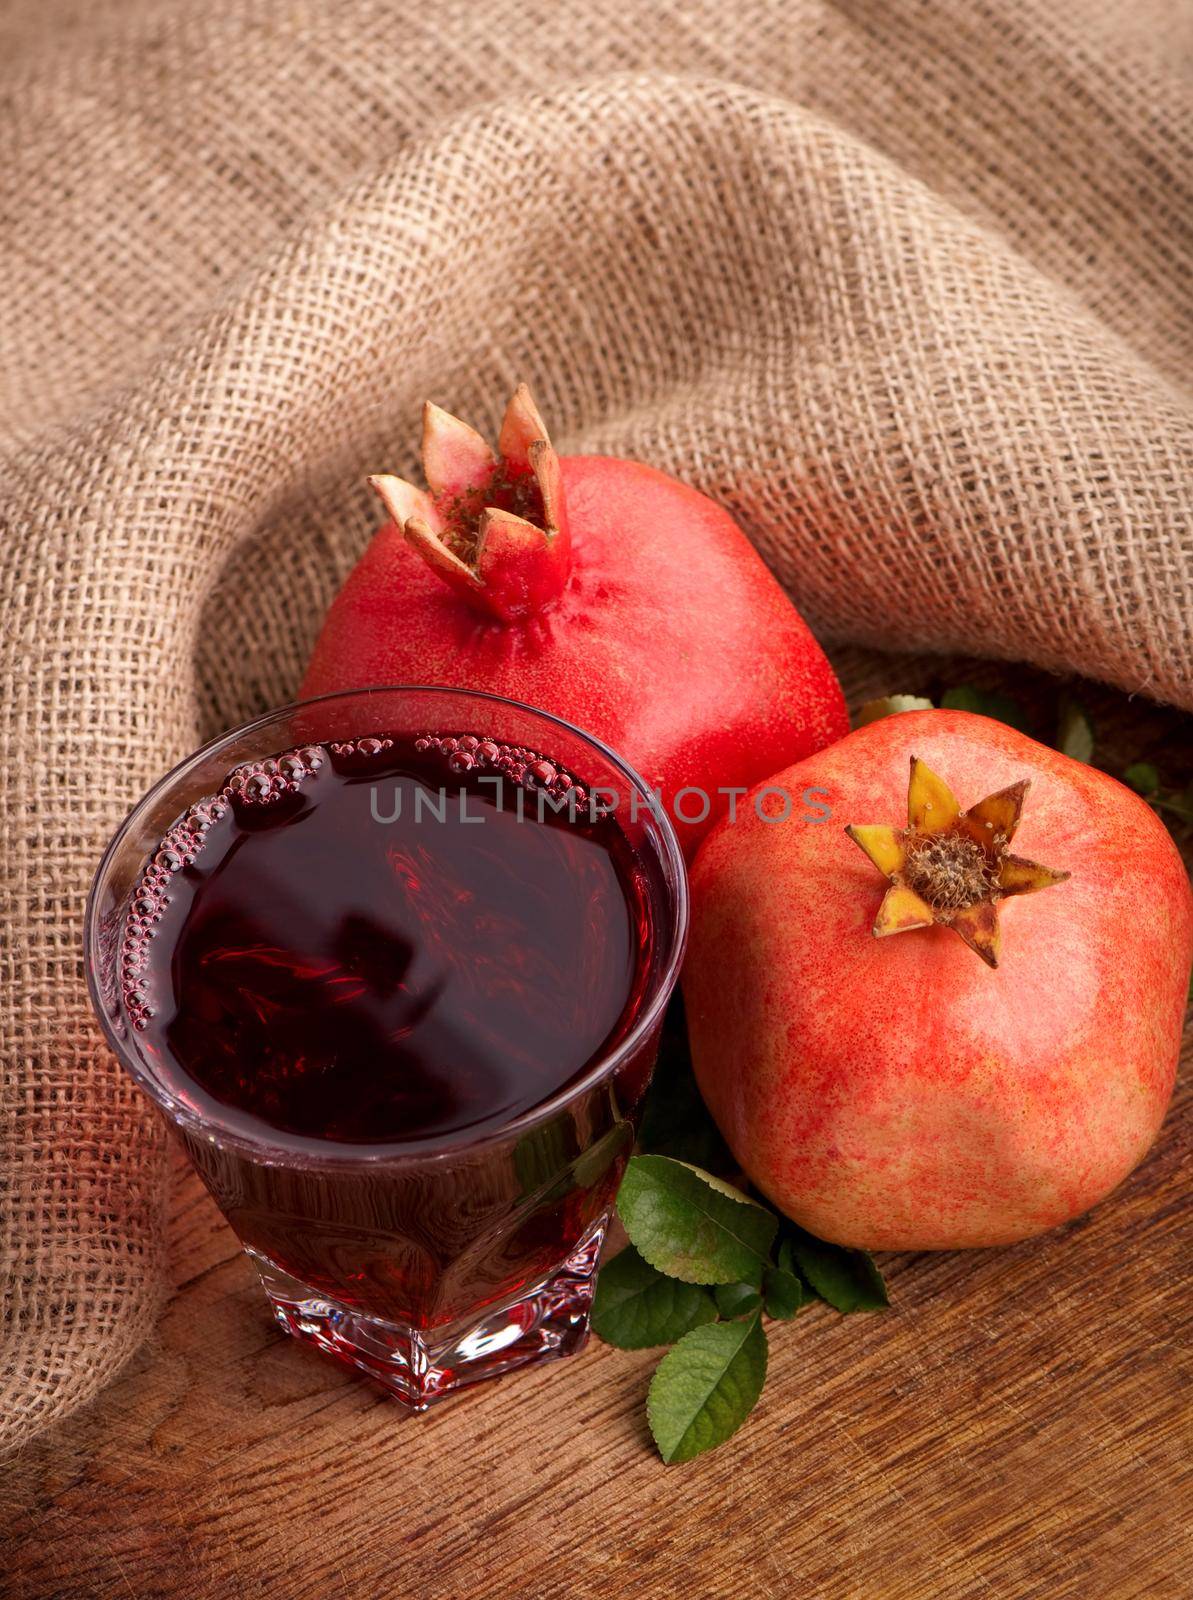 Fresh juicy pomegranate with leaves on a wooden board by aprilphoto